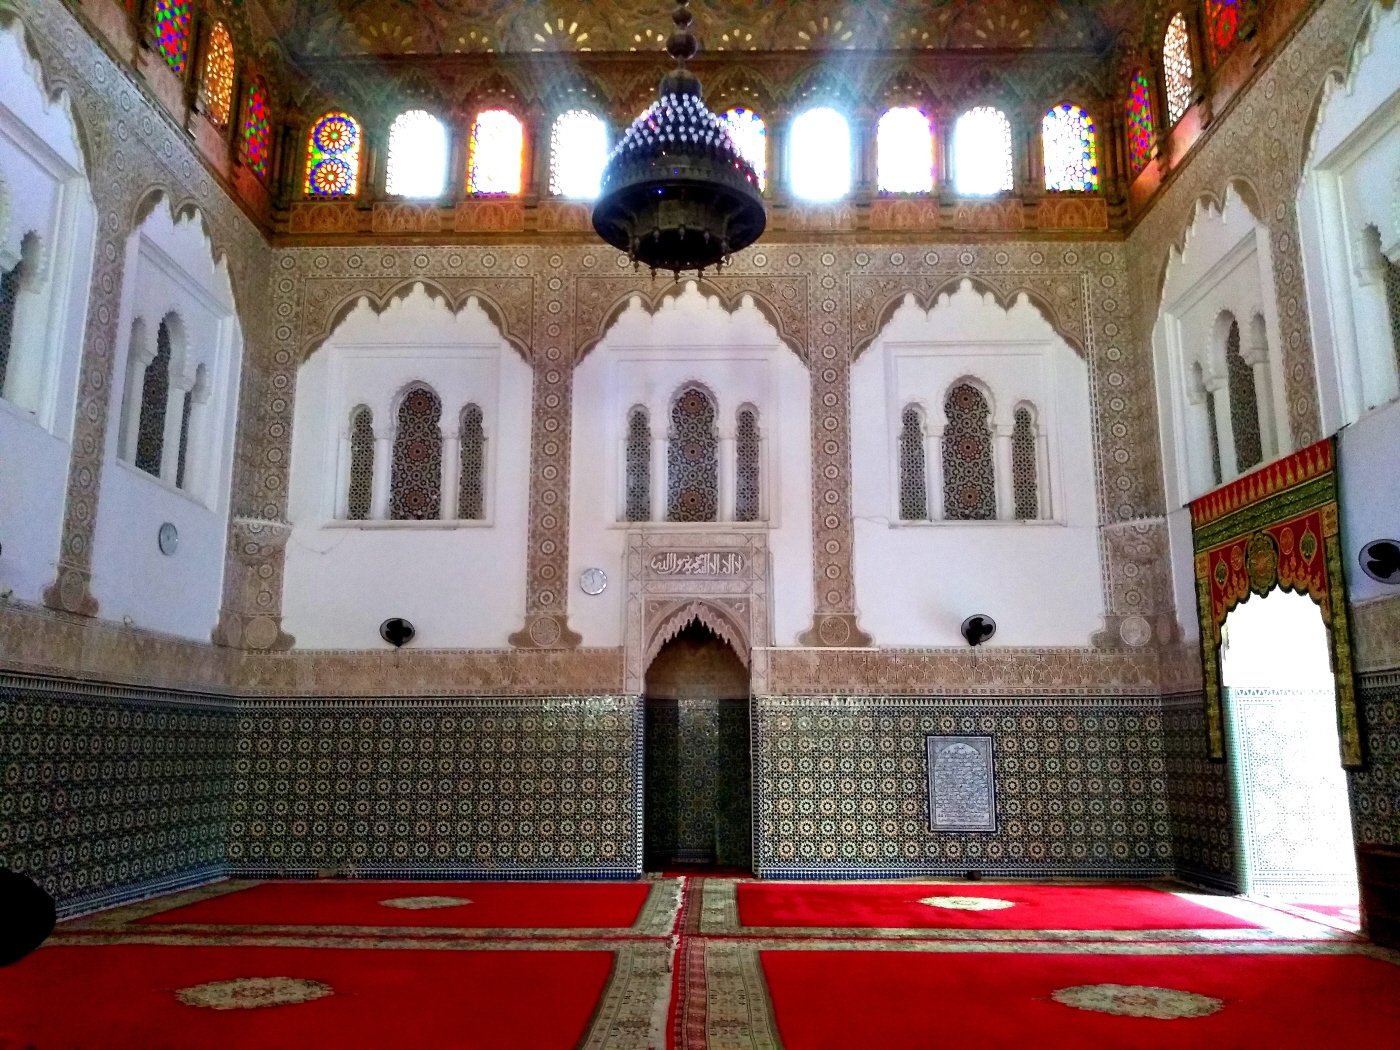 Moulay Idriss Mosque ( Idris ibn Abdillah -the Great, Great Grandson of the Holy Prophet)